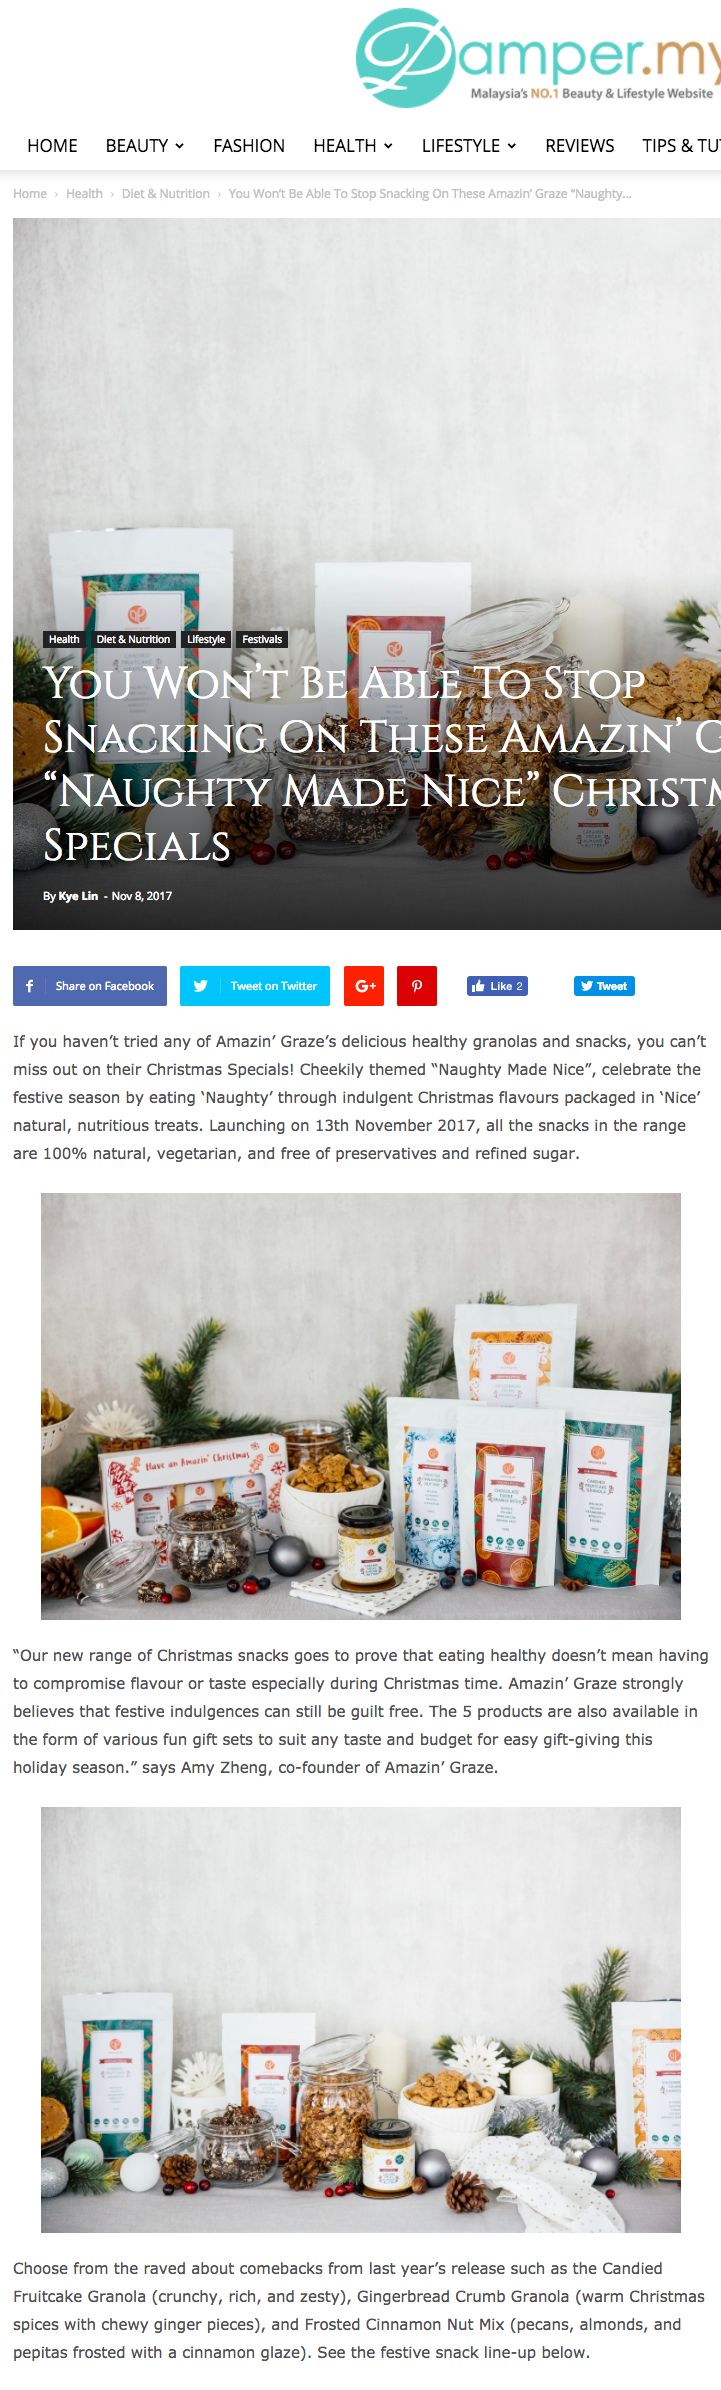 screencapture-pamper-my-news-health-diet-nutrition-you-wont-be-able-to-stop-snacking-on-the-amazin-graze-naughty-made-nice-christmas-specials-1510215568999.png